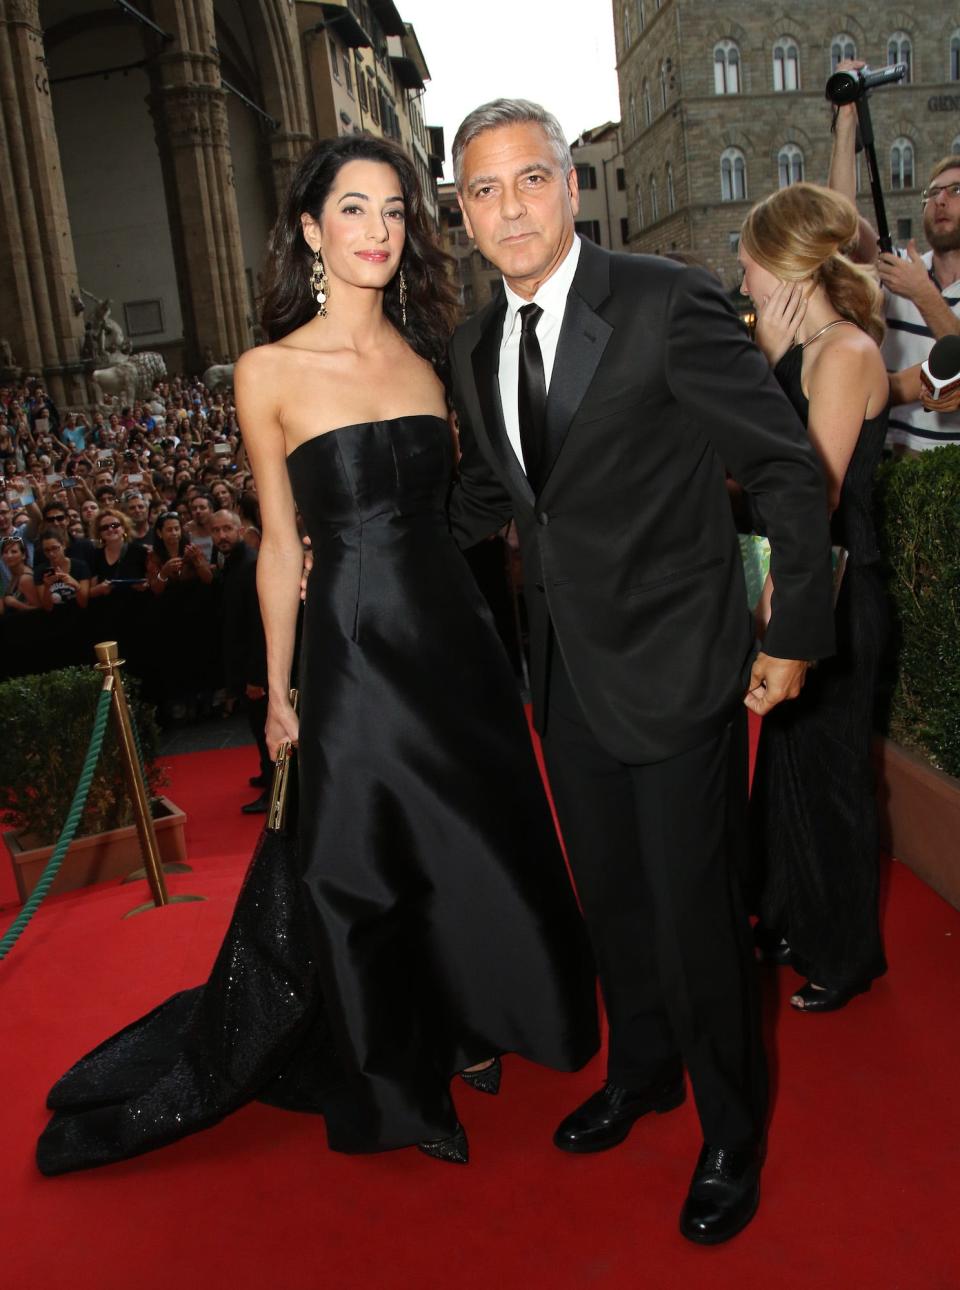 Amal and George Clooney at a gala in Florence, Italy, on September 7, 2014.